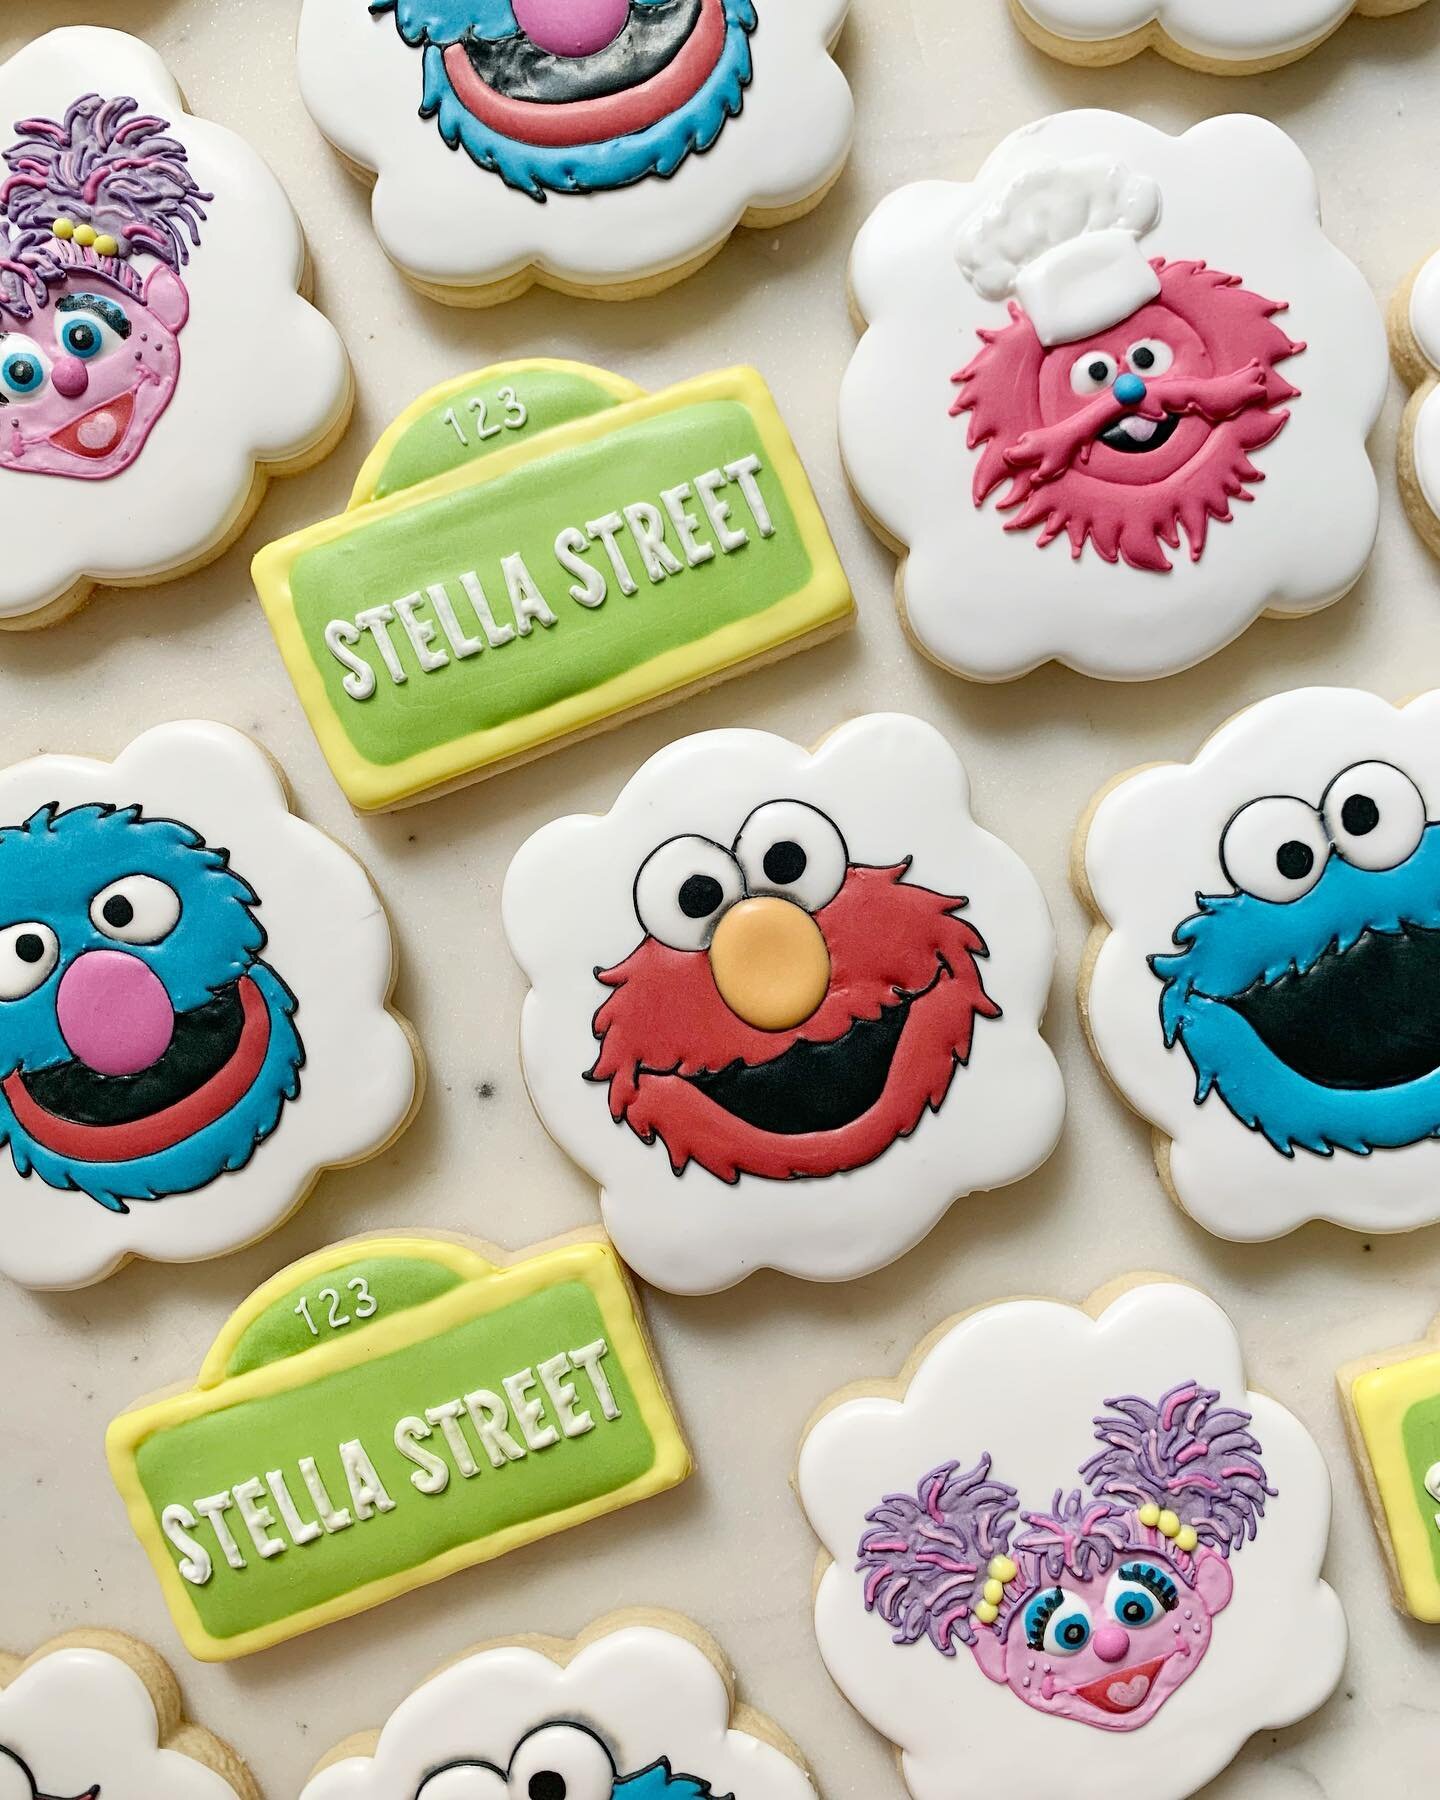 Let&rsquo;s. Talk. Character cookies!

If you didn&rsquo;t know, this is a controversial topic in cookie world. Do you take the order knowing you&rsquo;re probably infringing on some copyright laws, do you make cookies *inspired by* the characters bu